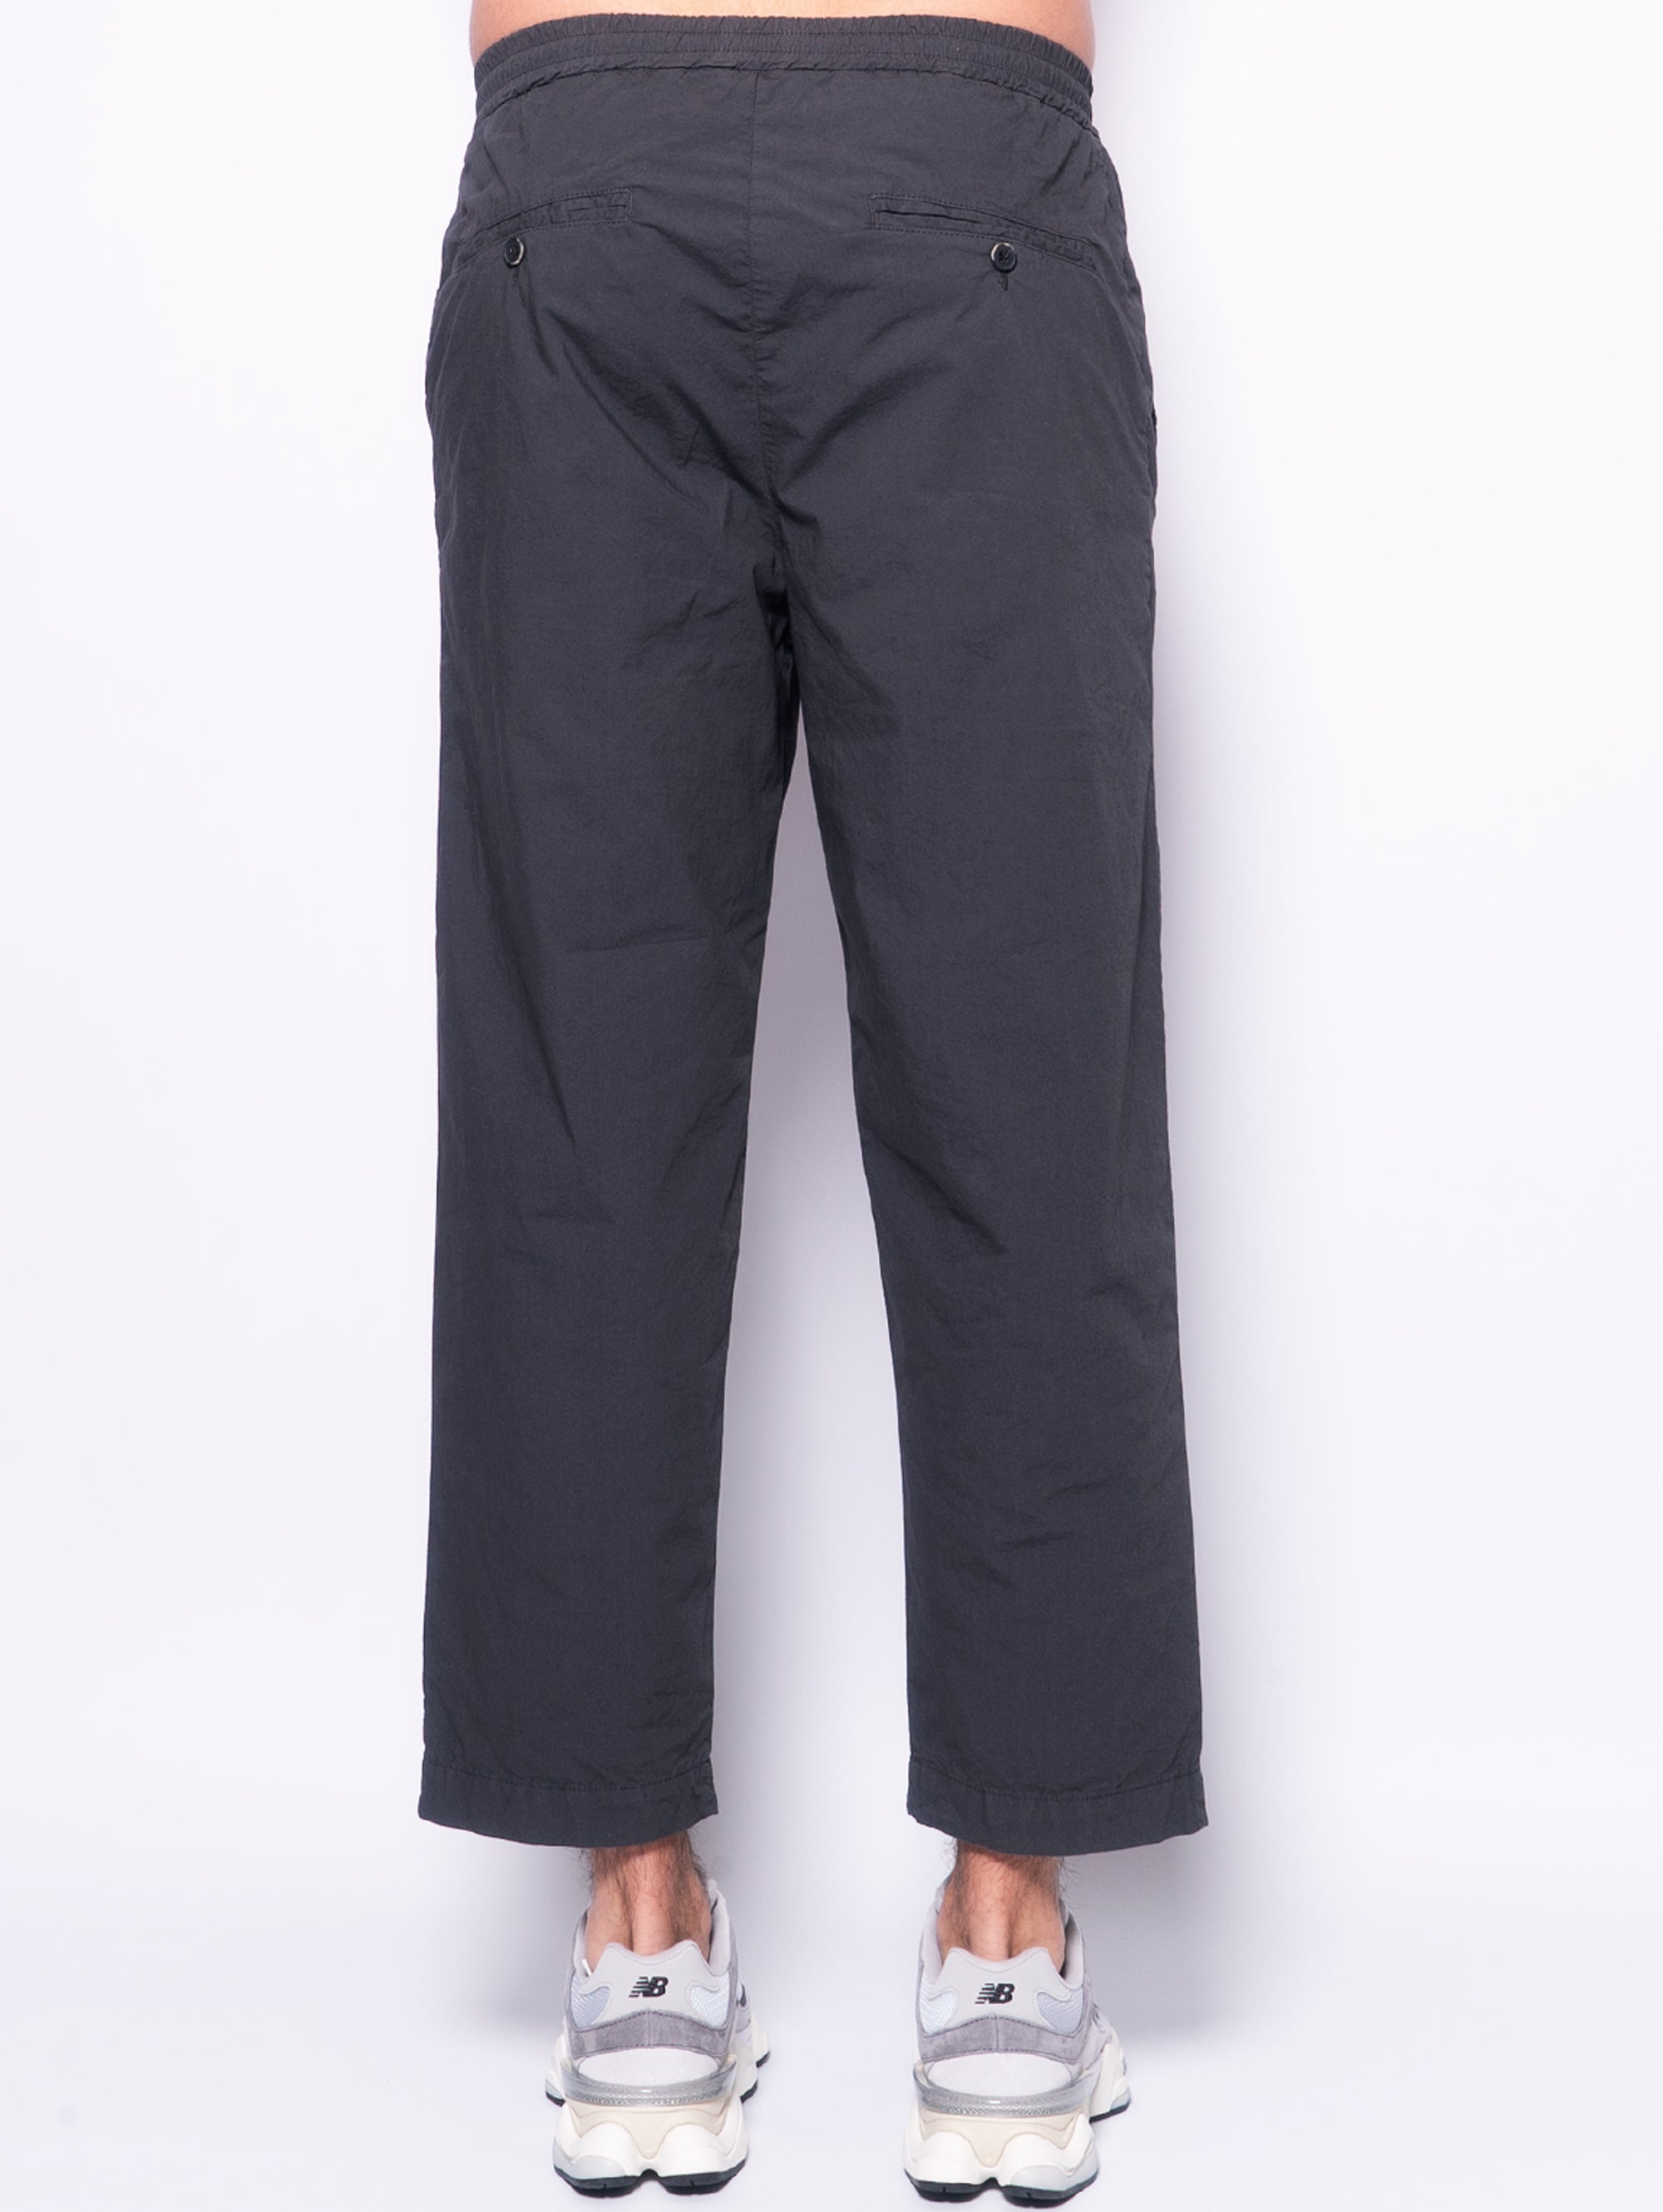 Relaxed Jogger Pants in Ameo Lead Cotton